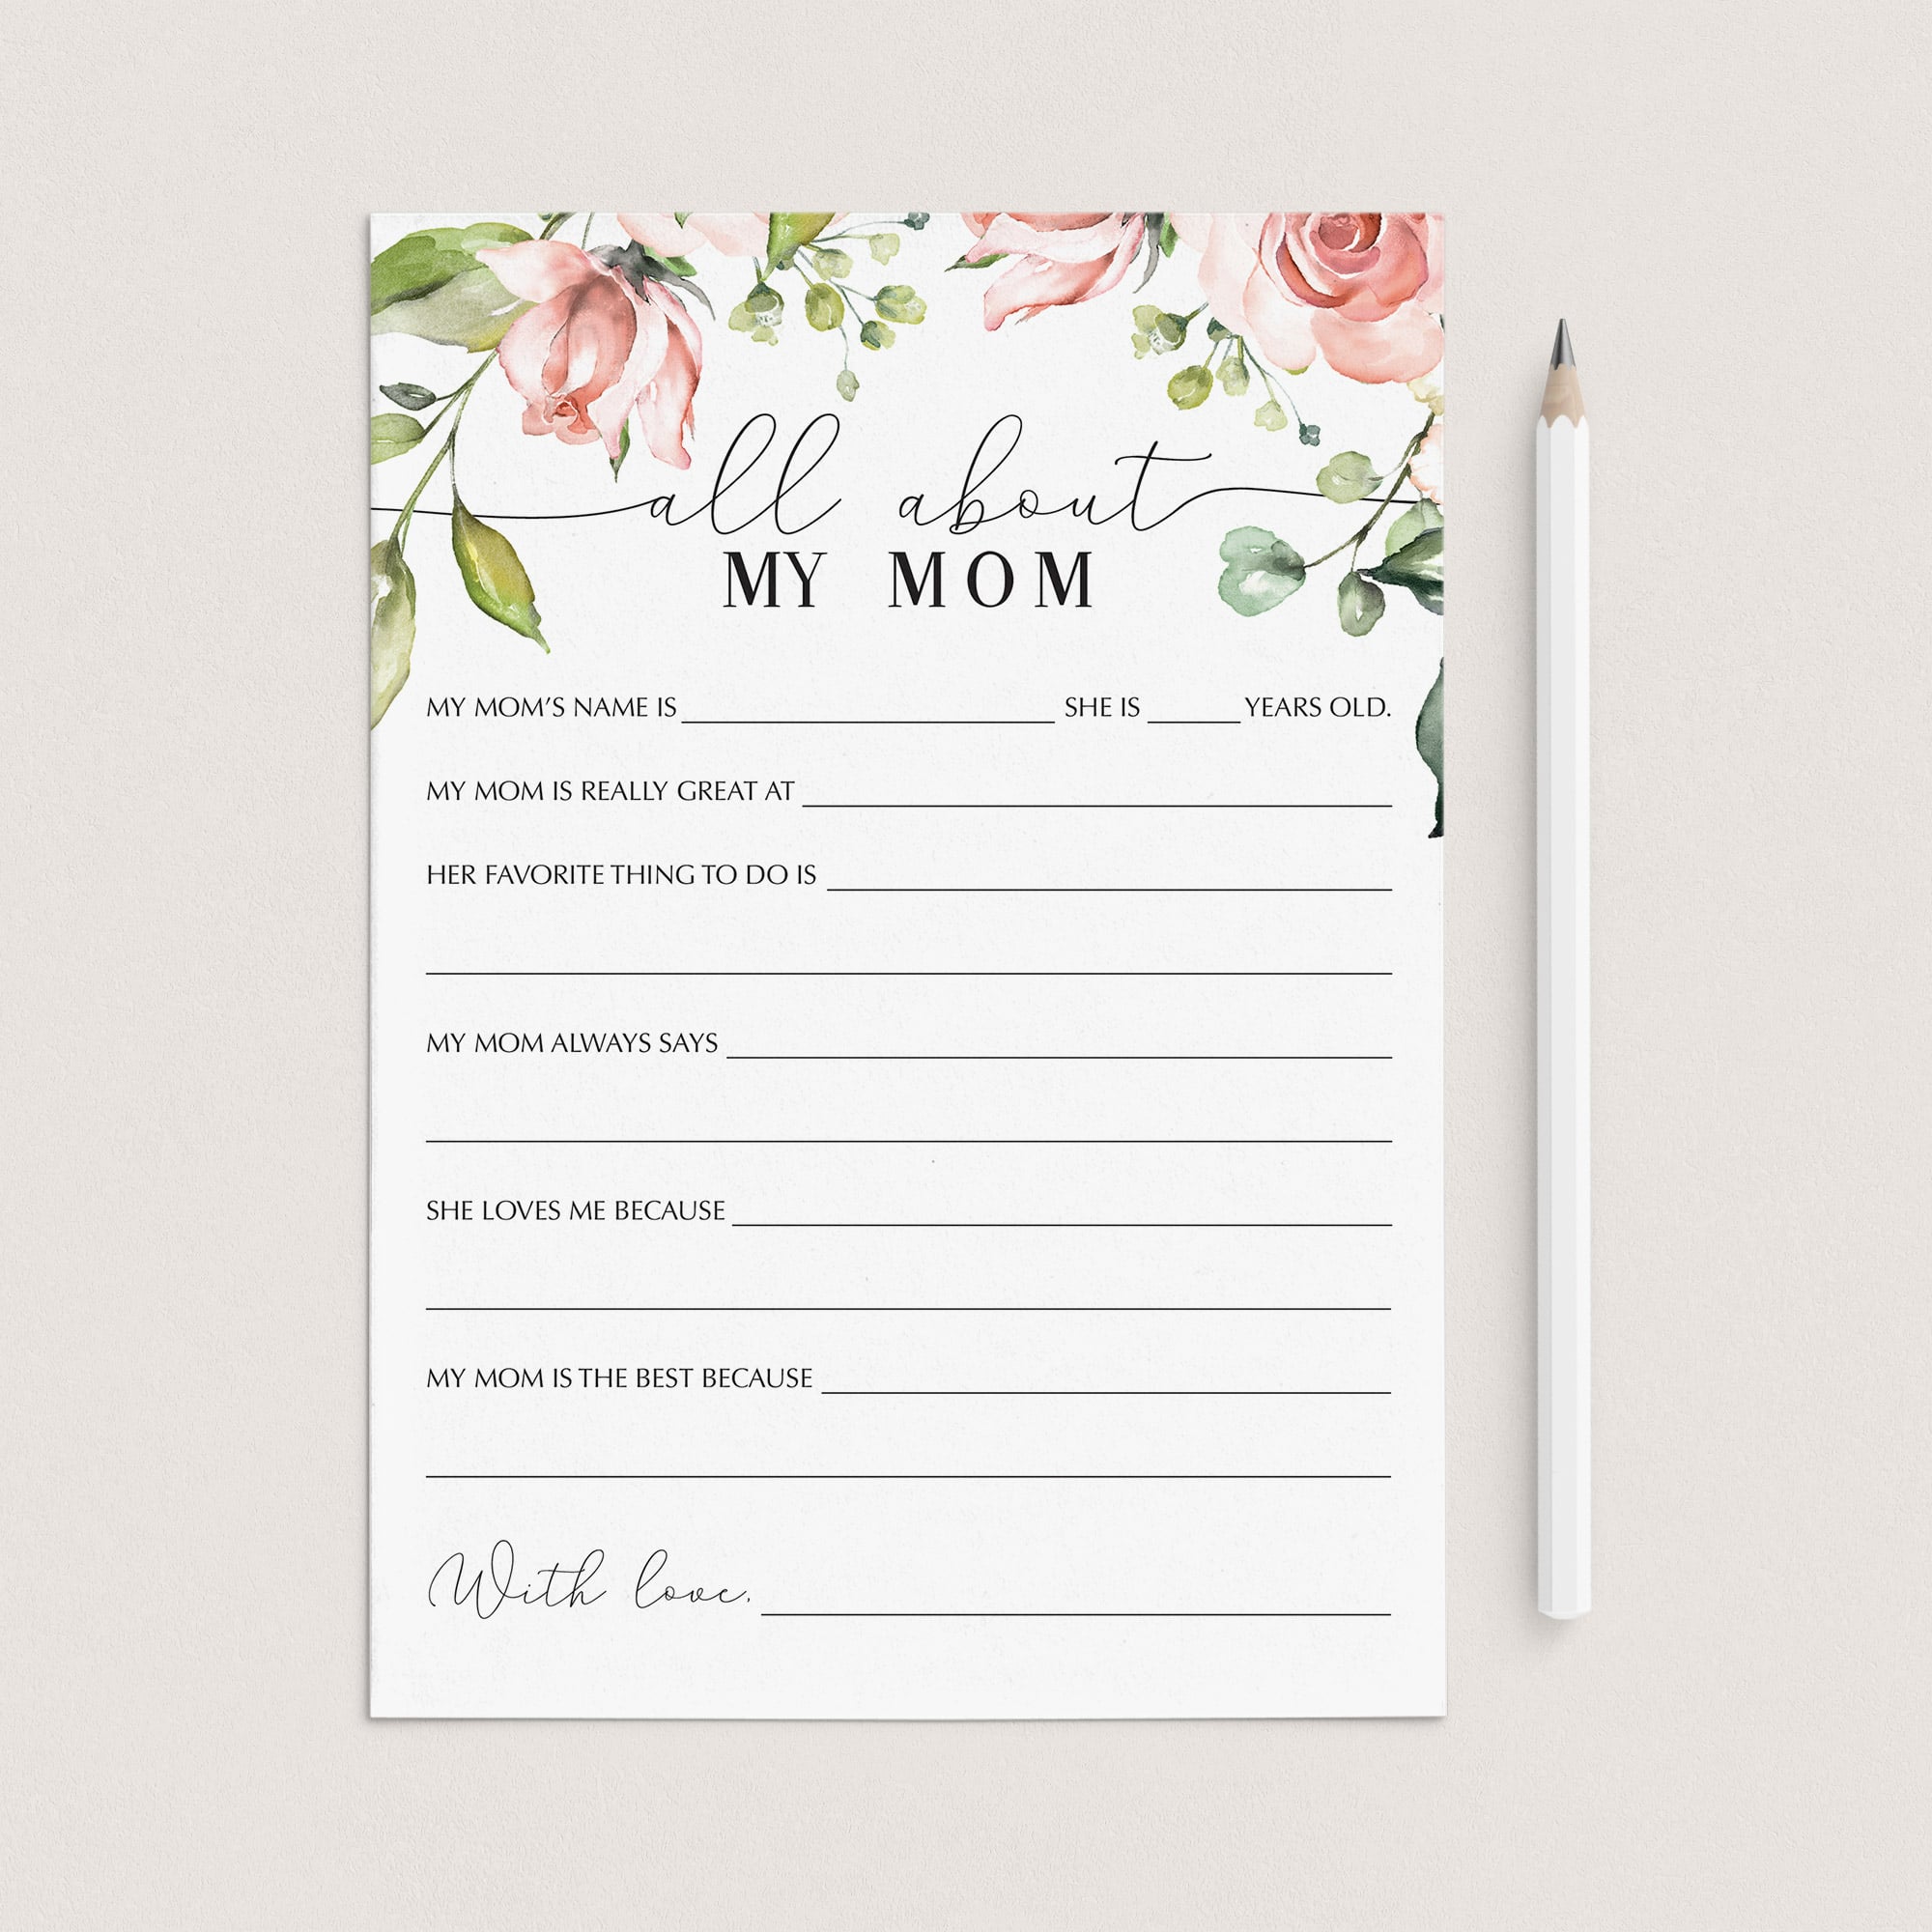 Mother's Day All About Mom Questionnaire Printable & Virtual by LittleSizzle